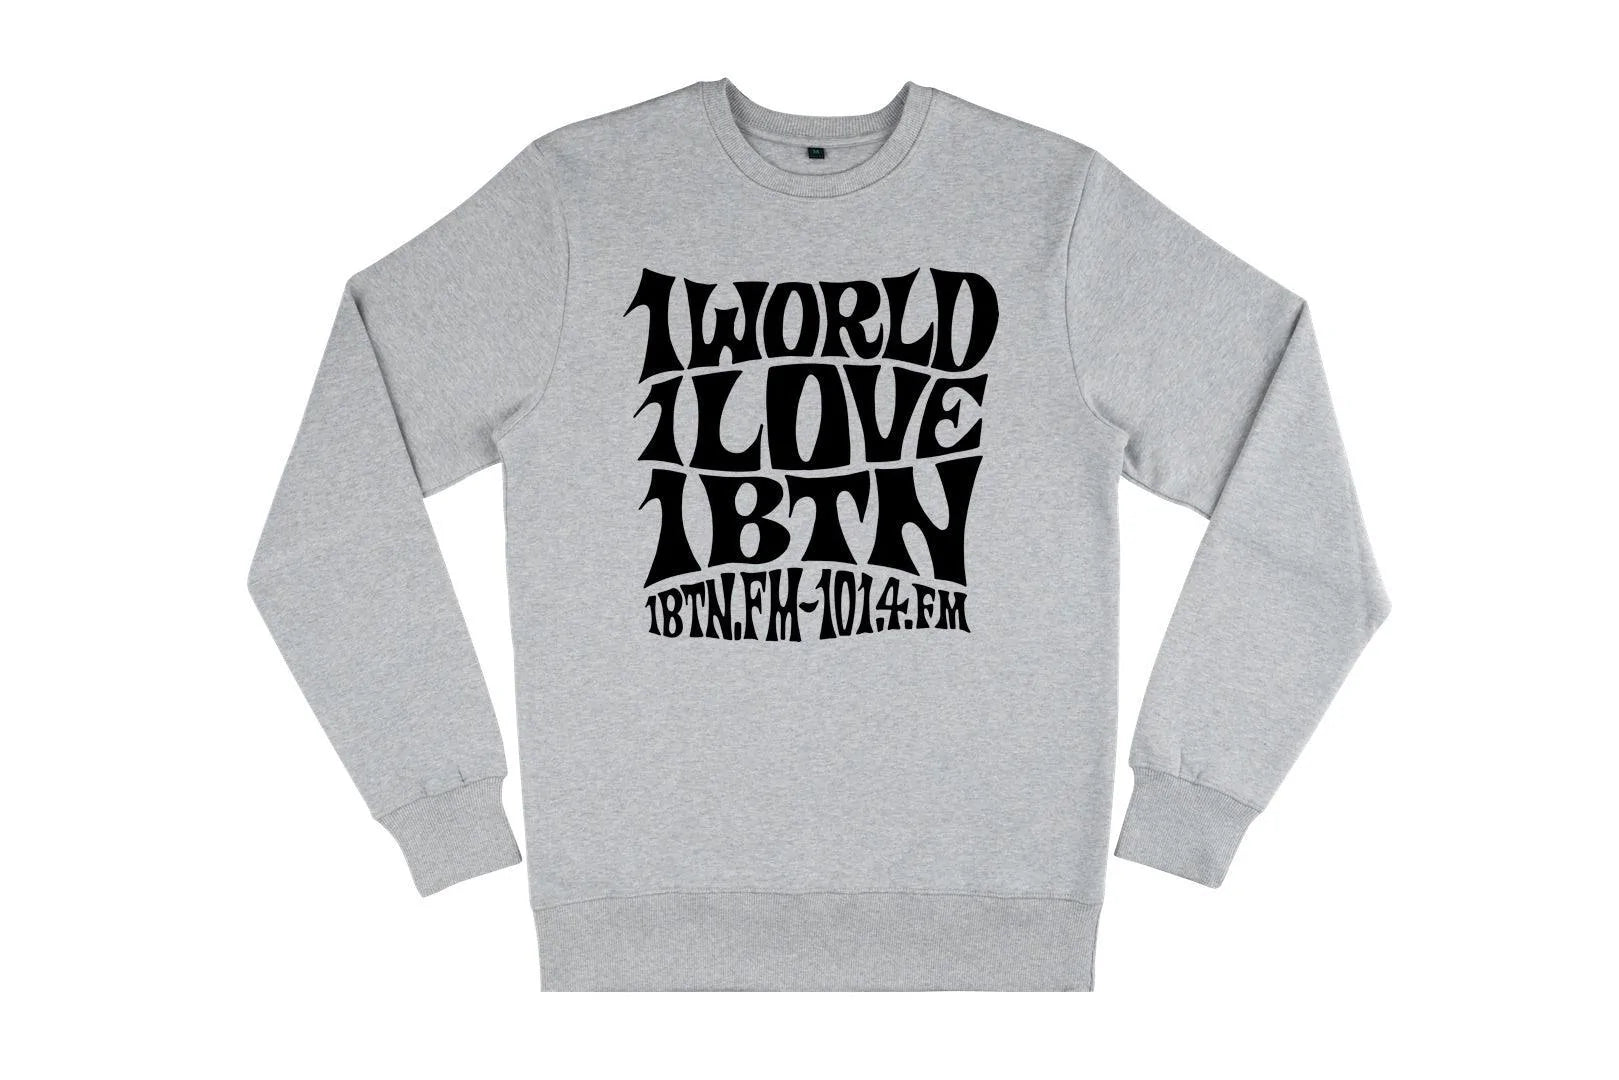 1 WORLD 1 LOVE by Swifty: Sweatshirt Official Merchandise of 1BTN.FM (5 Colour Options) - SOUND IS COLOUR